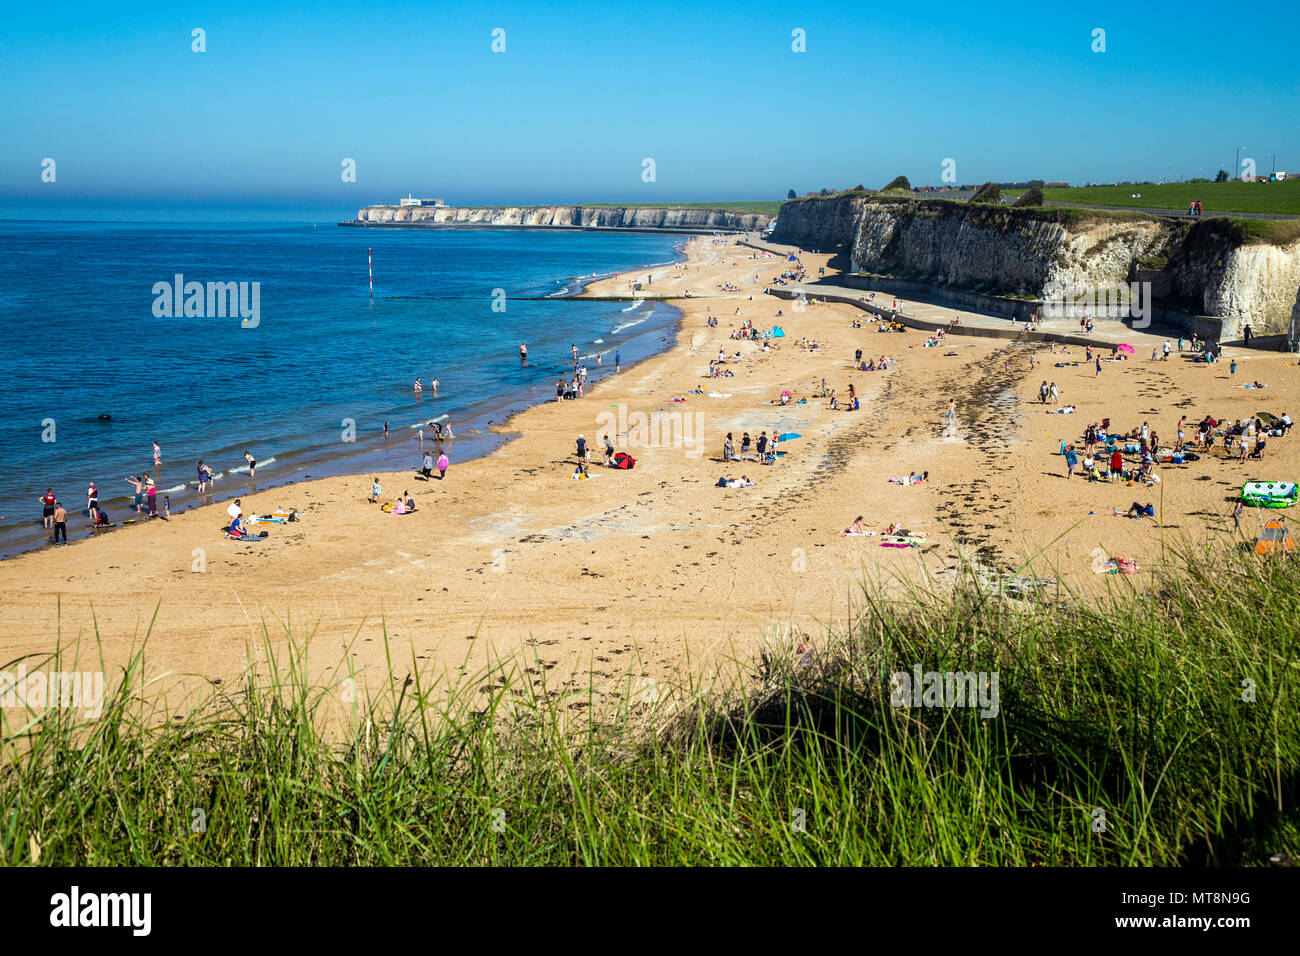 Crowds of beachgoers in the summer at Palm Bay sandy beach near Margate, Kent, UK Stock Photo